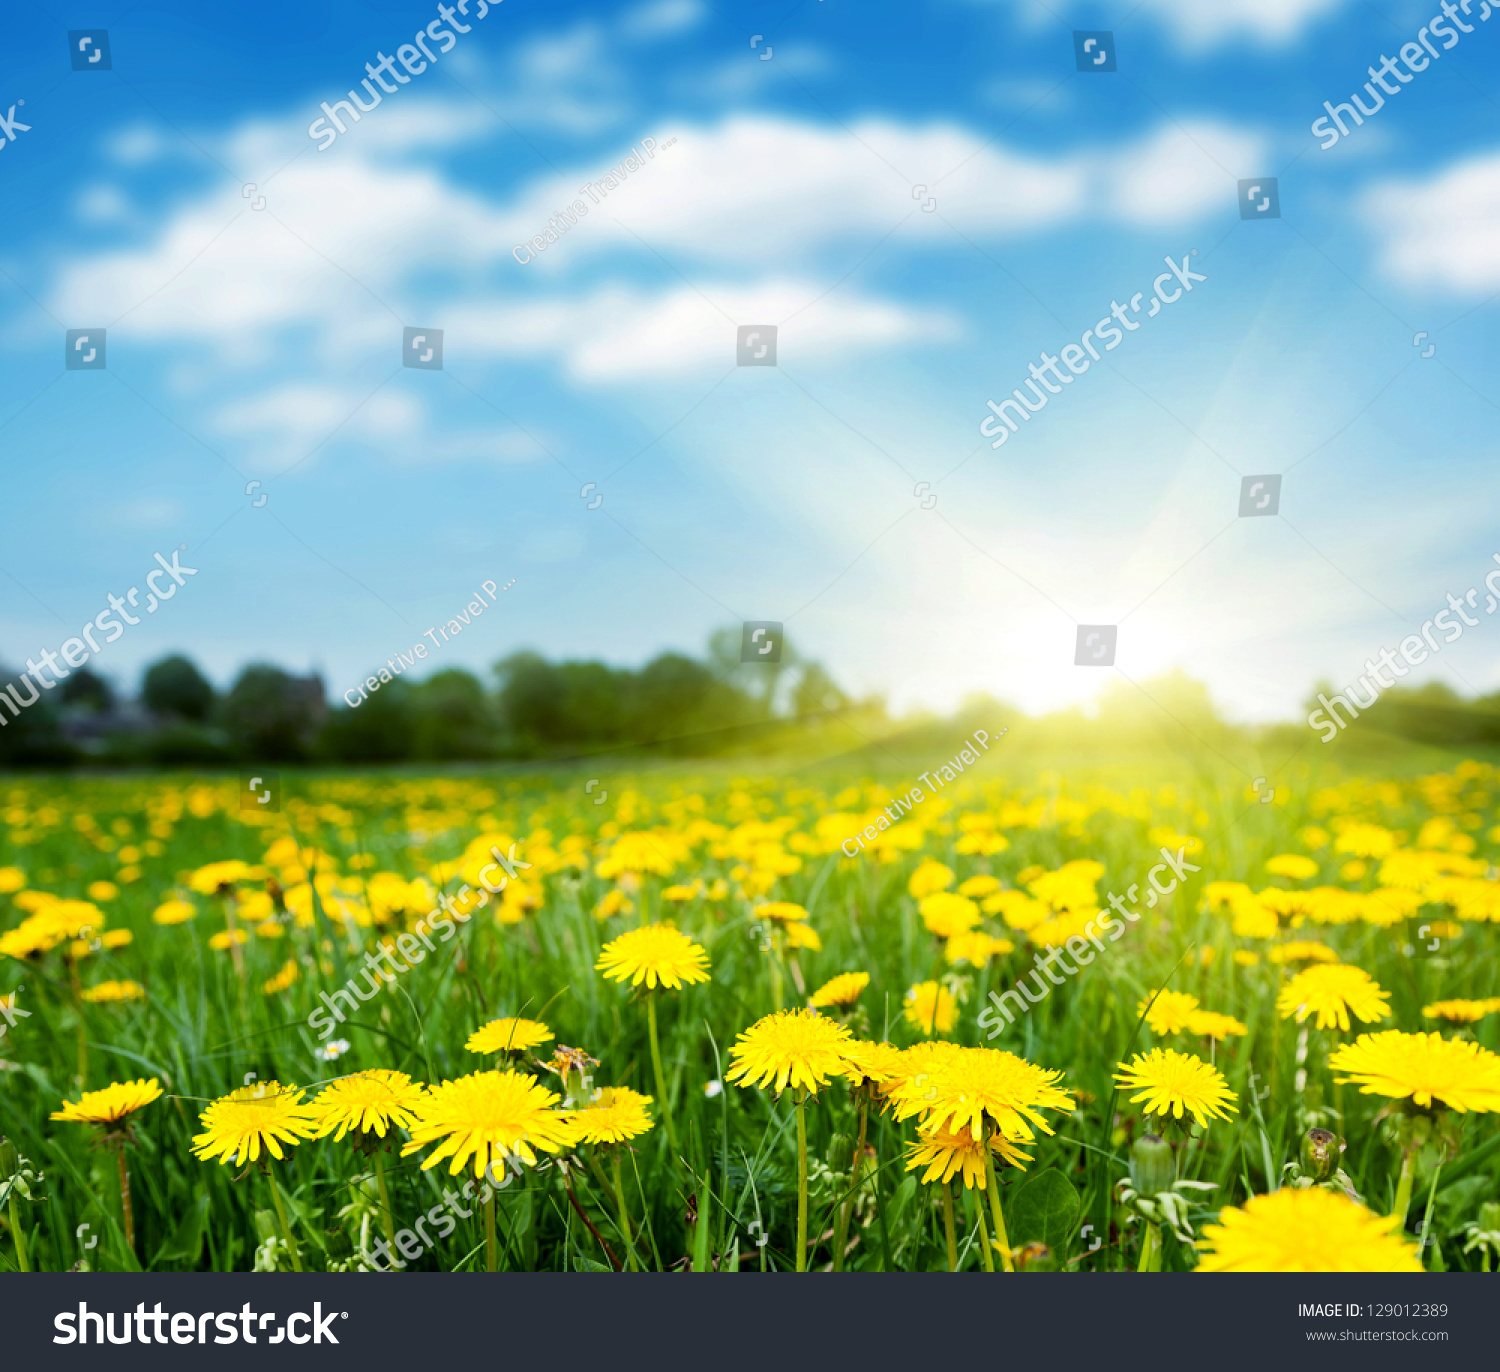 LET'S CHAT! - Page 2 Stock-photo-spring-field-with-dandelions-on-bright-sunny-day-129012389